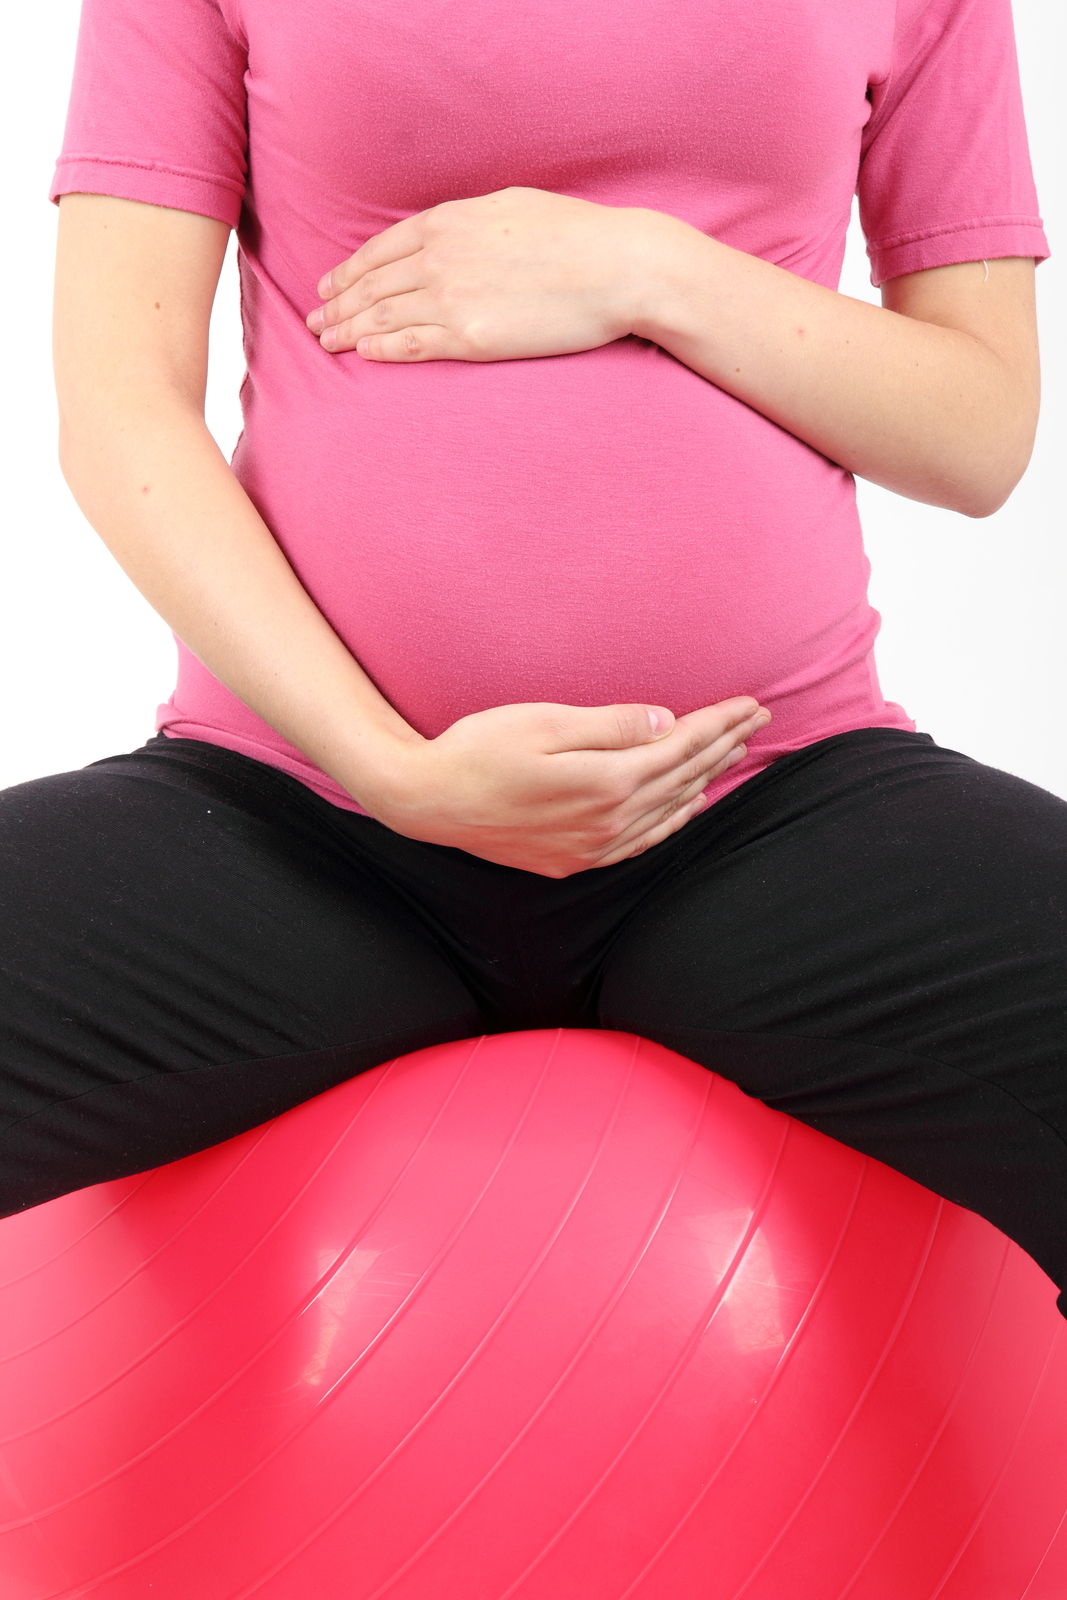 bigstock-Pregnant-woman-excercises-with-26860289 copy